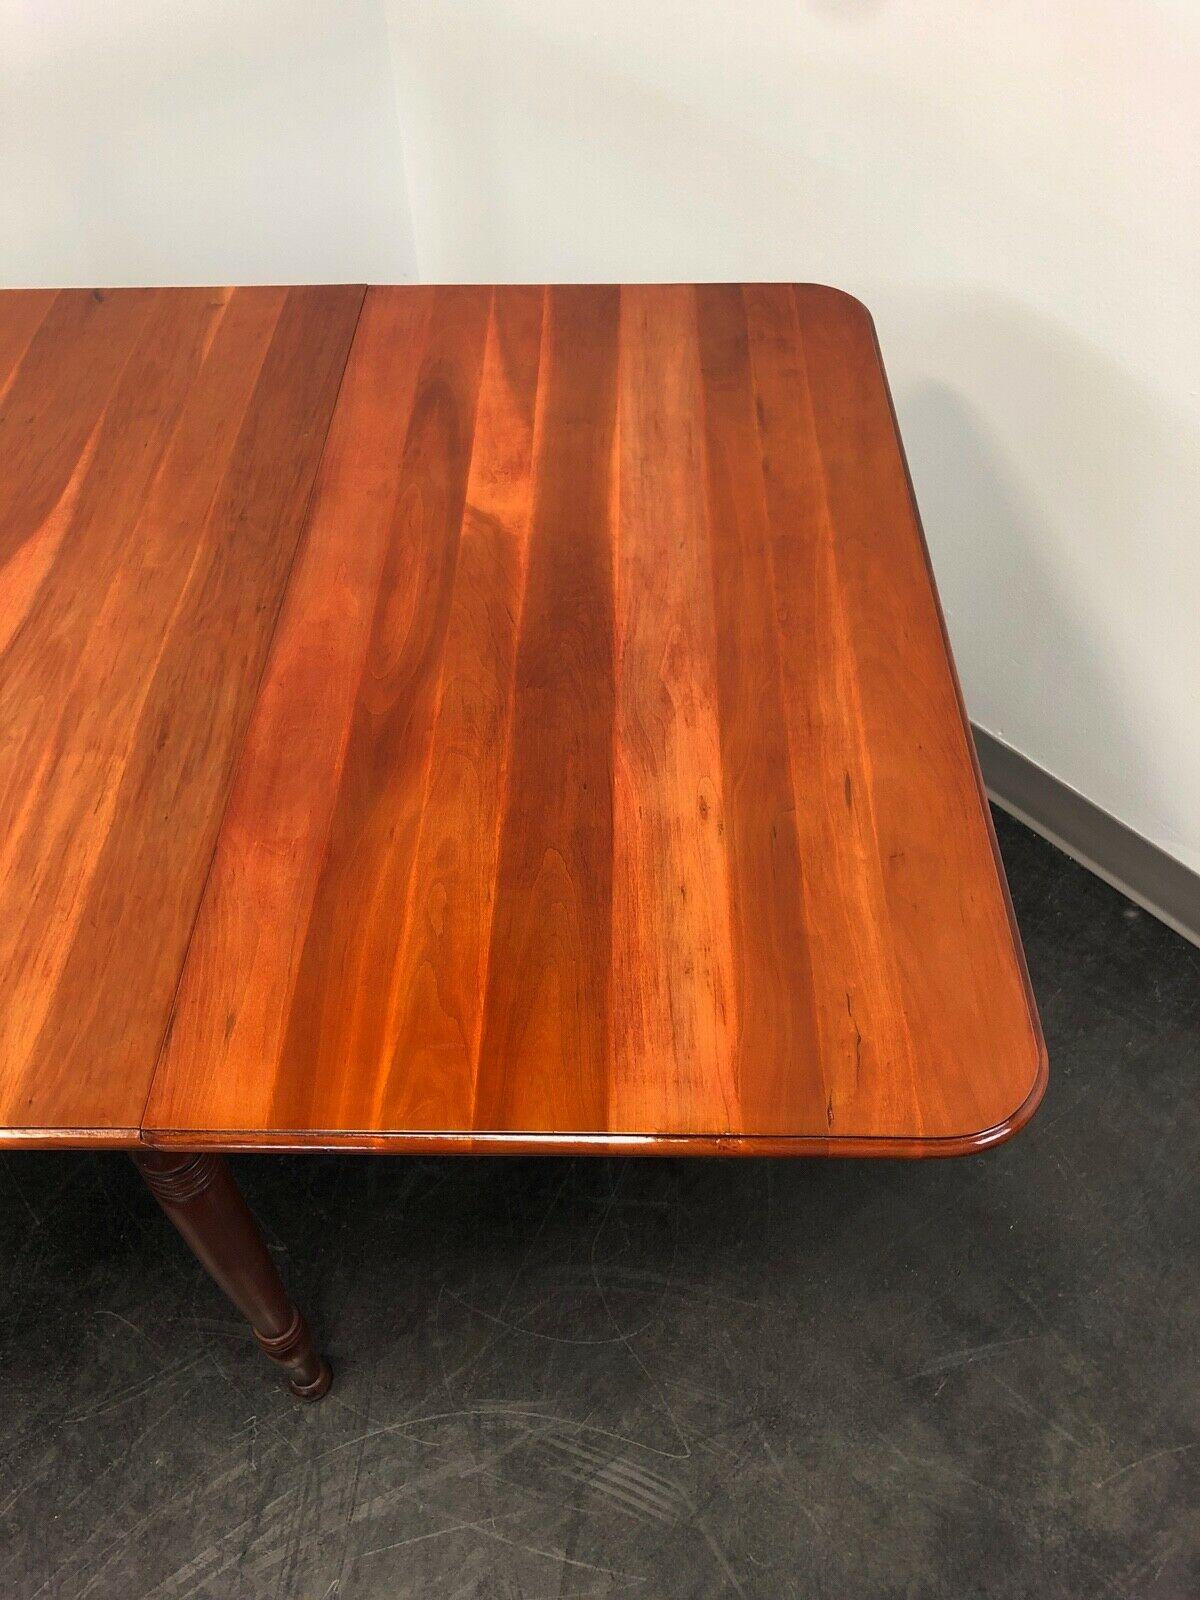 Antique Cherry Gateleg Drop-Leaf Dining Table In Good Condition For Sale In Charlotte, NC